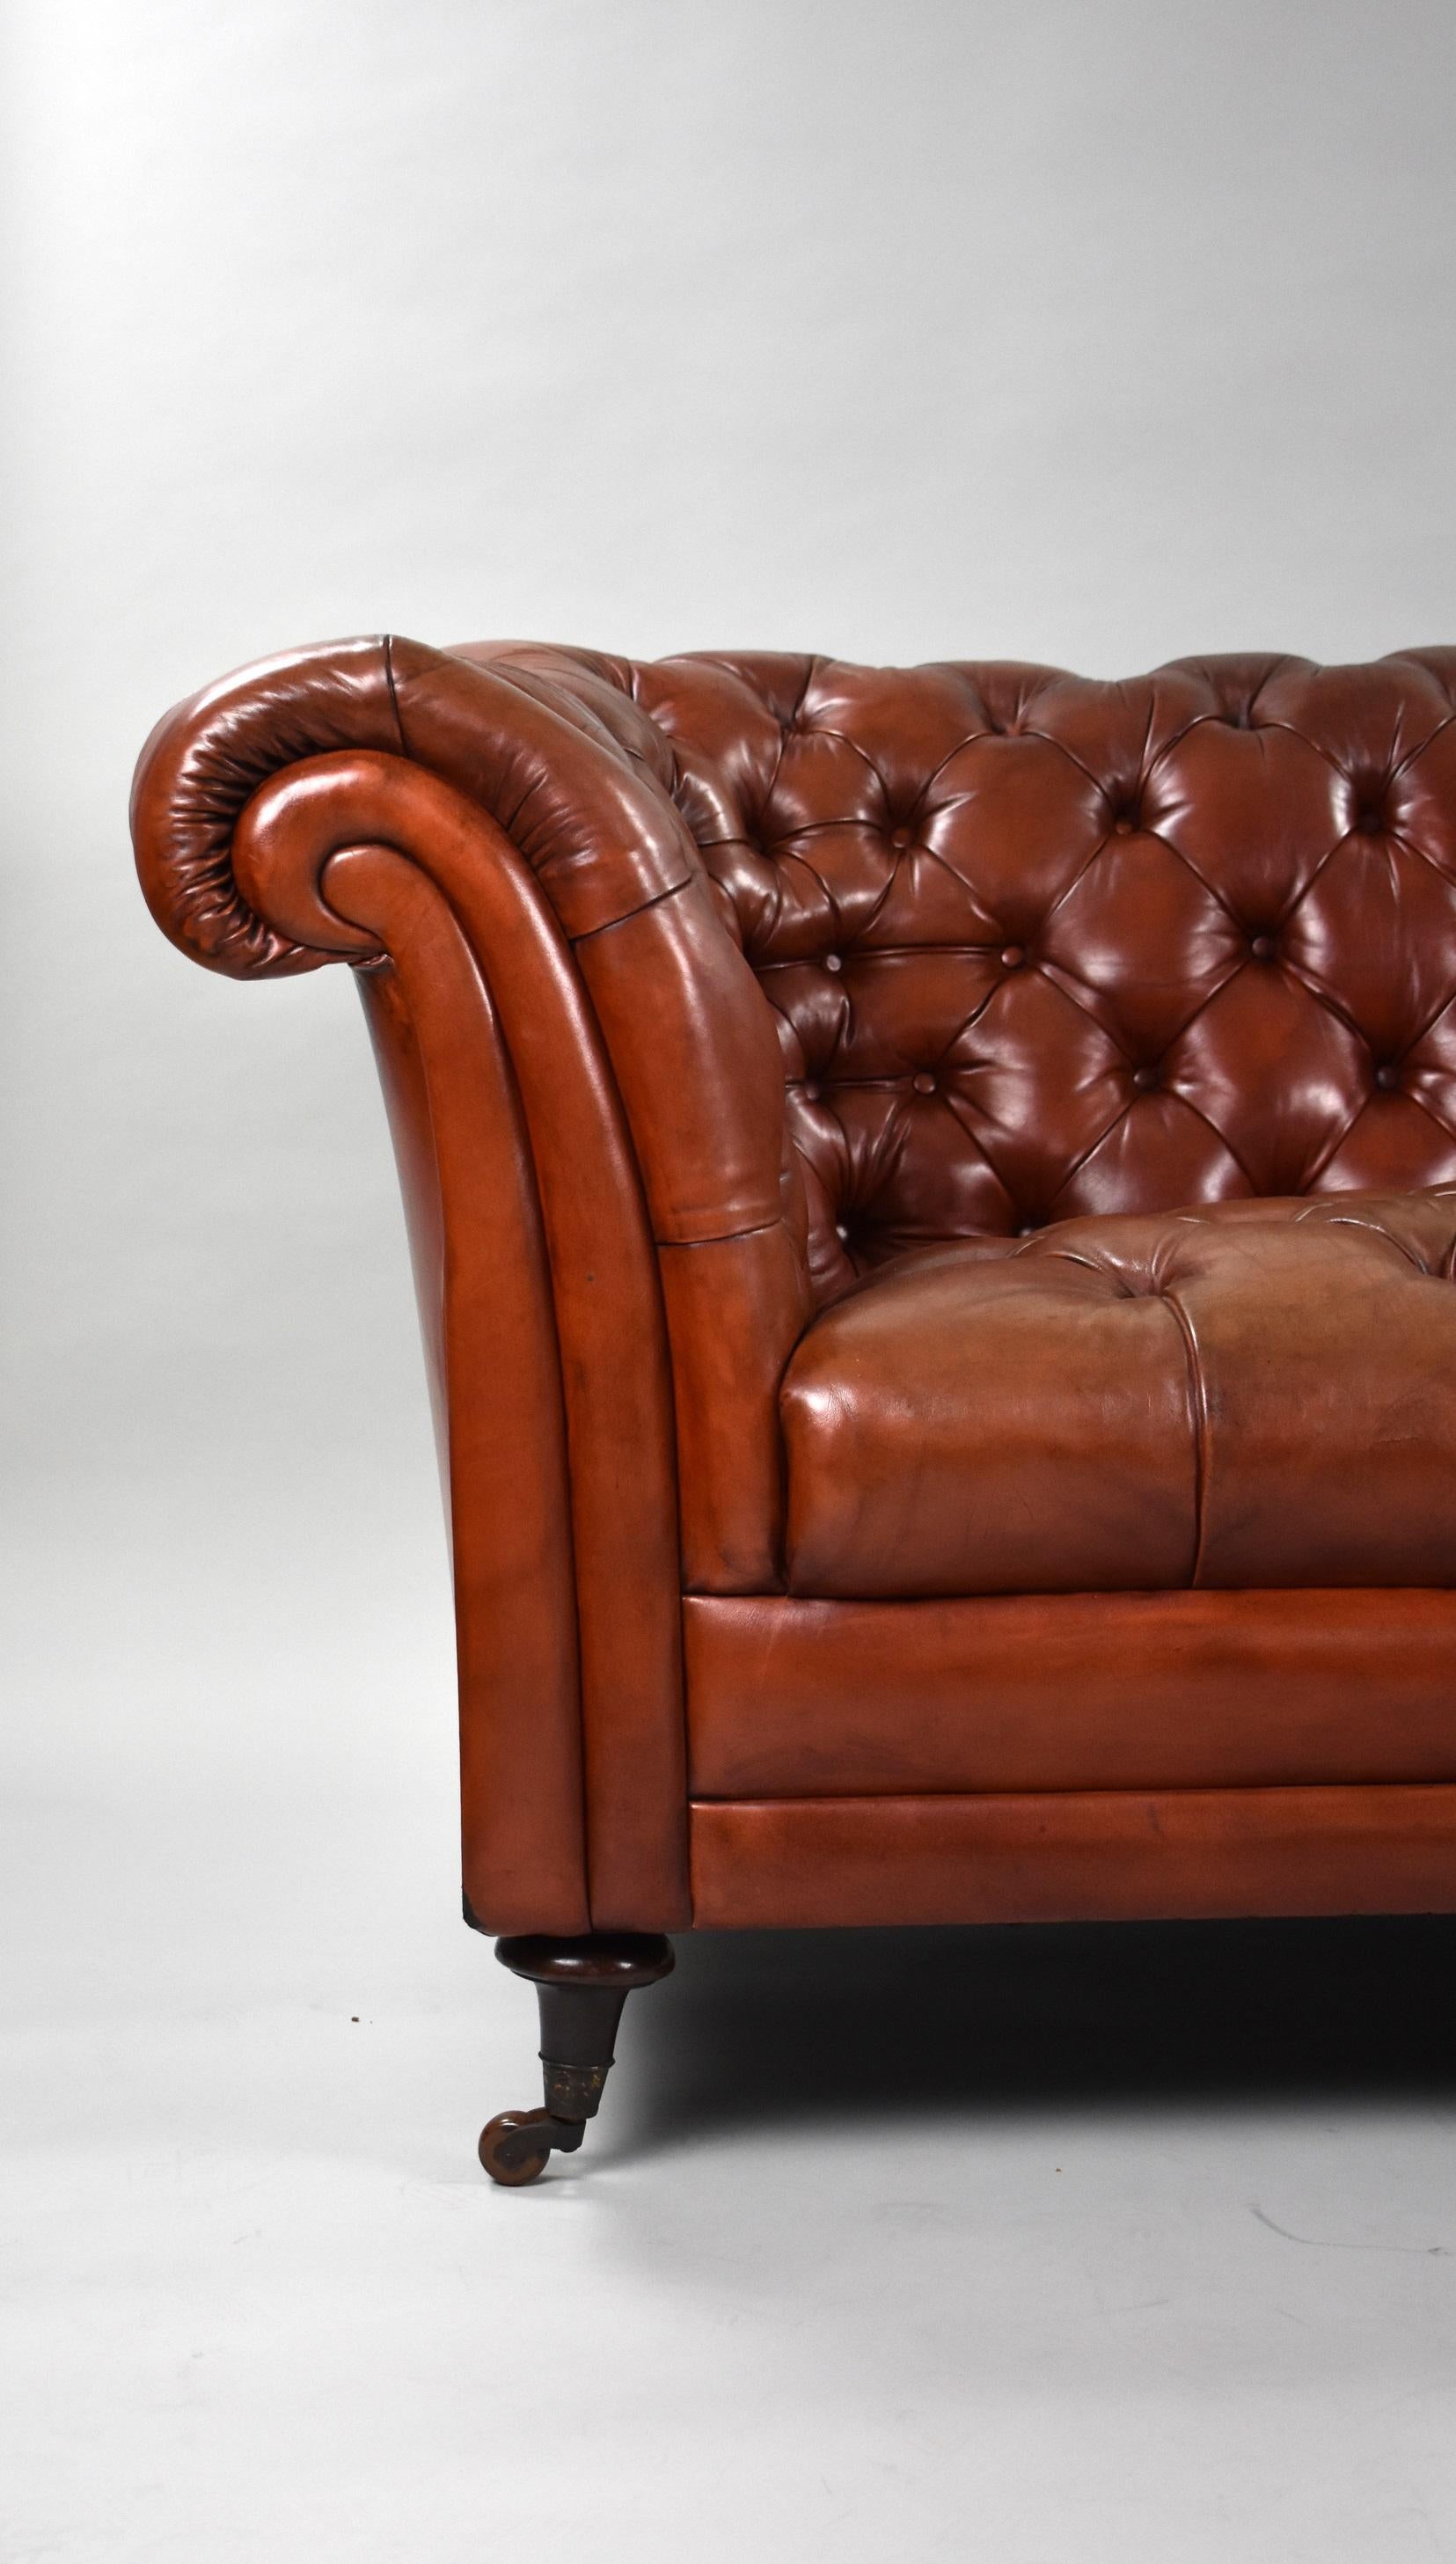 Late Victorian Victorian Style Leather Chesterfield Sofa